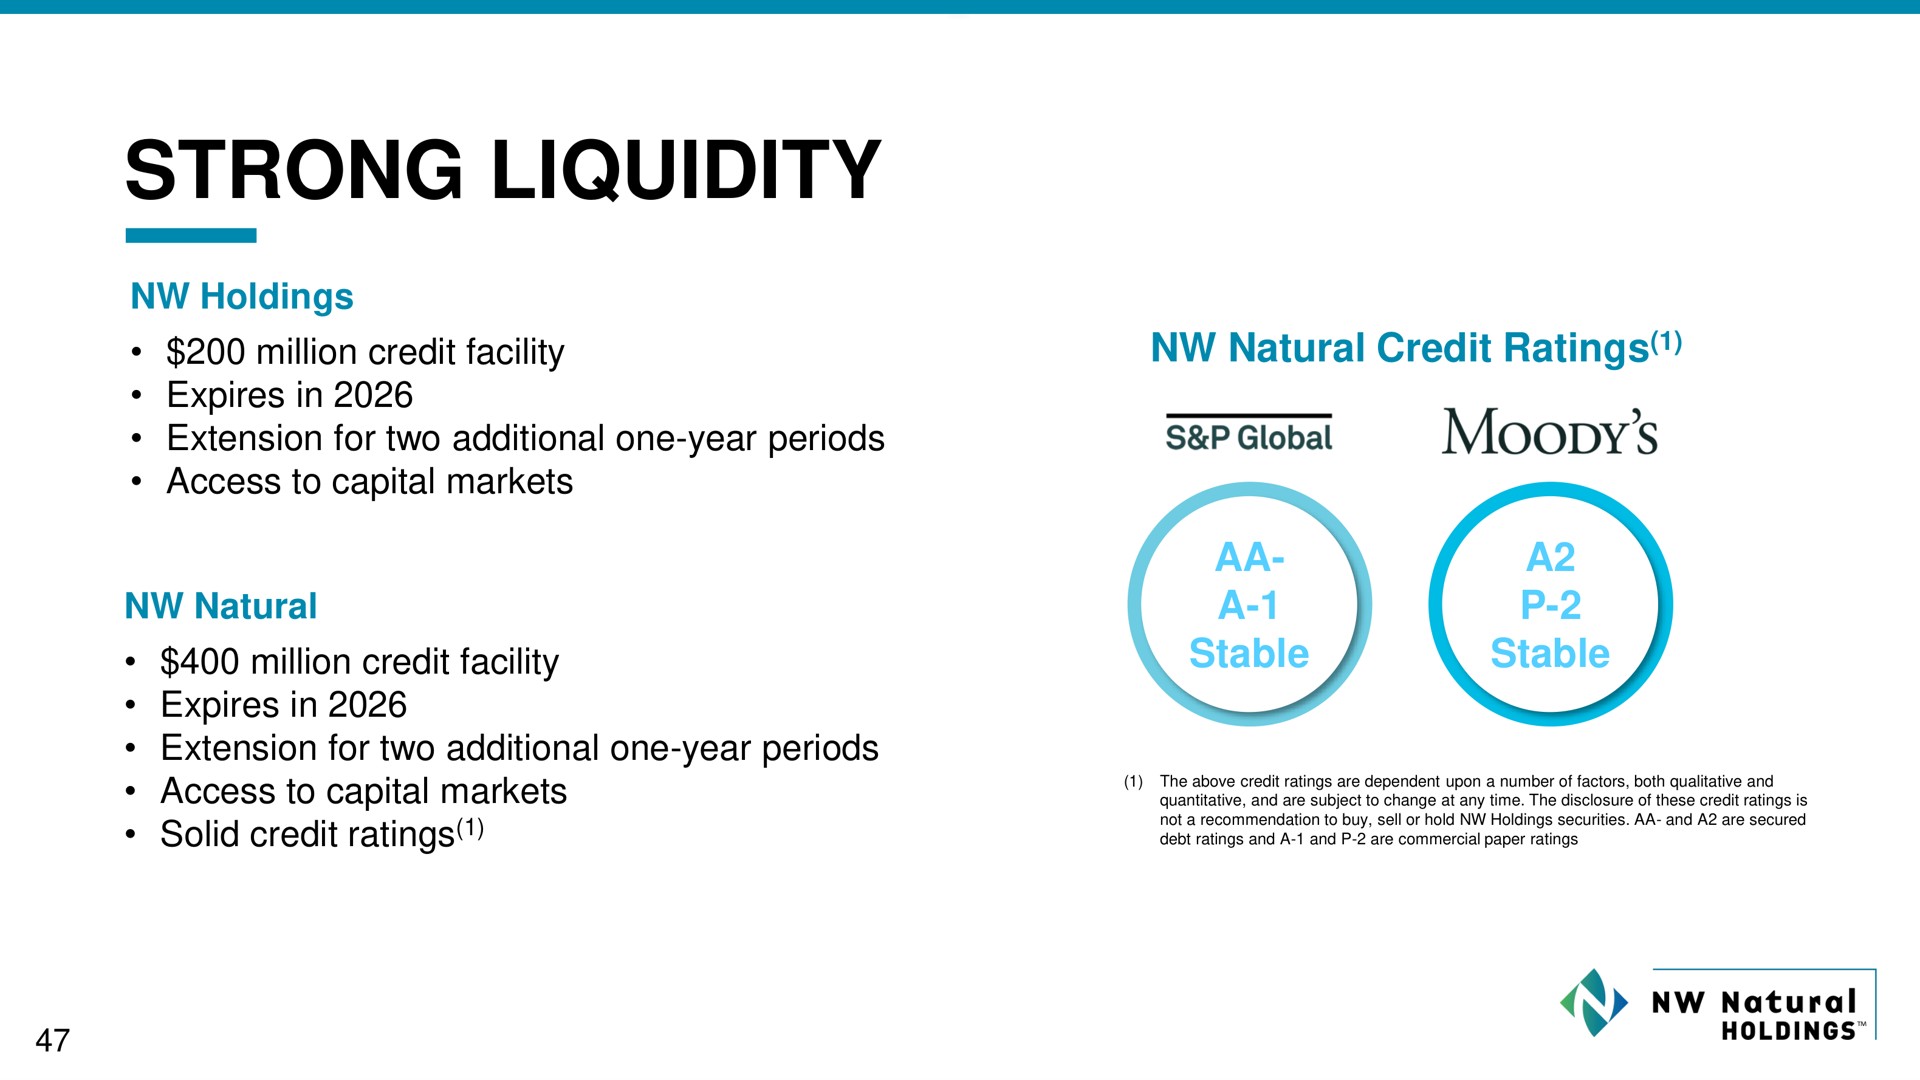 strong liquidity | NW Natural Holdings